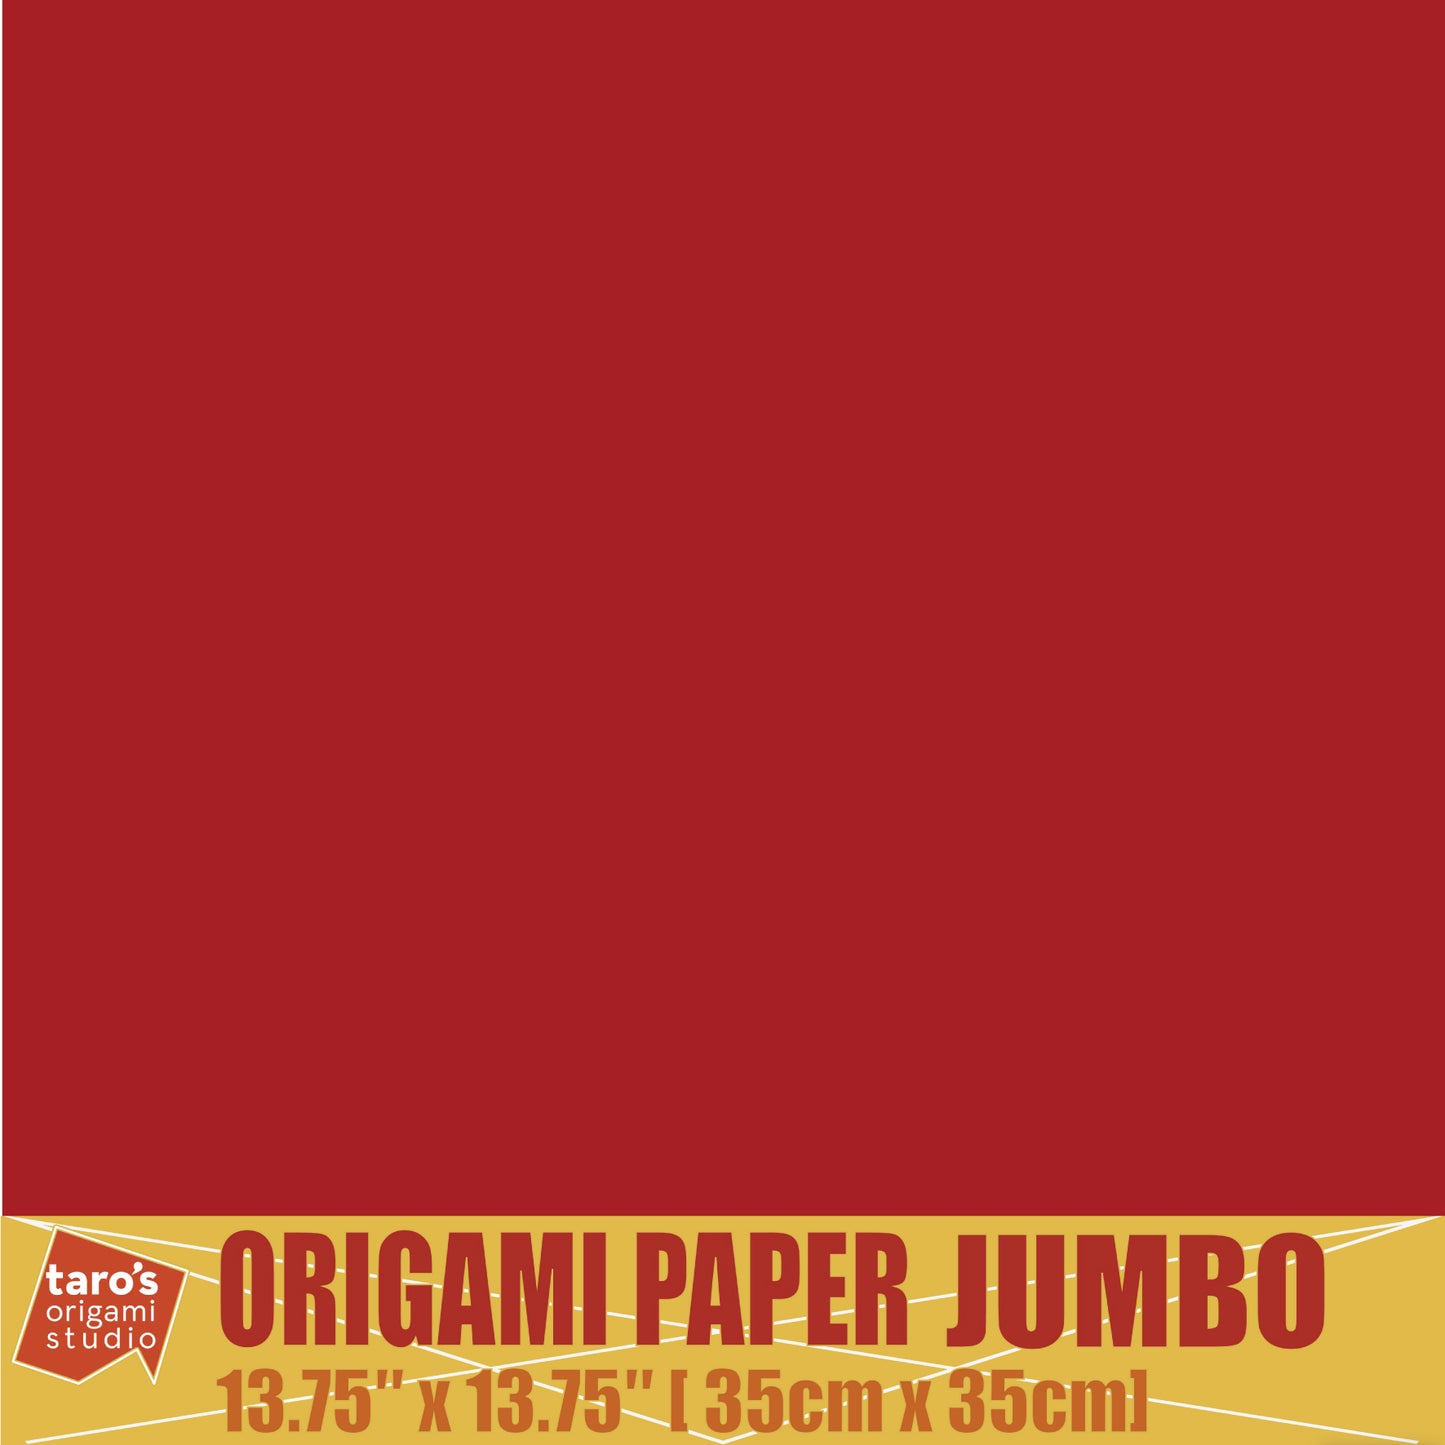 [Taro's Origami Studio] TANT Jumbo 13.75 Inch (35 cm) Double Sided Single Color (Reddish Brown) 20 Sheets (All Same Color) for Beginner to Expert (Made in Japan)